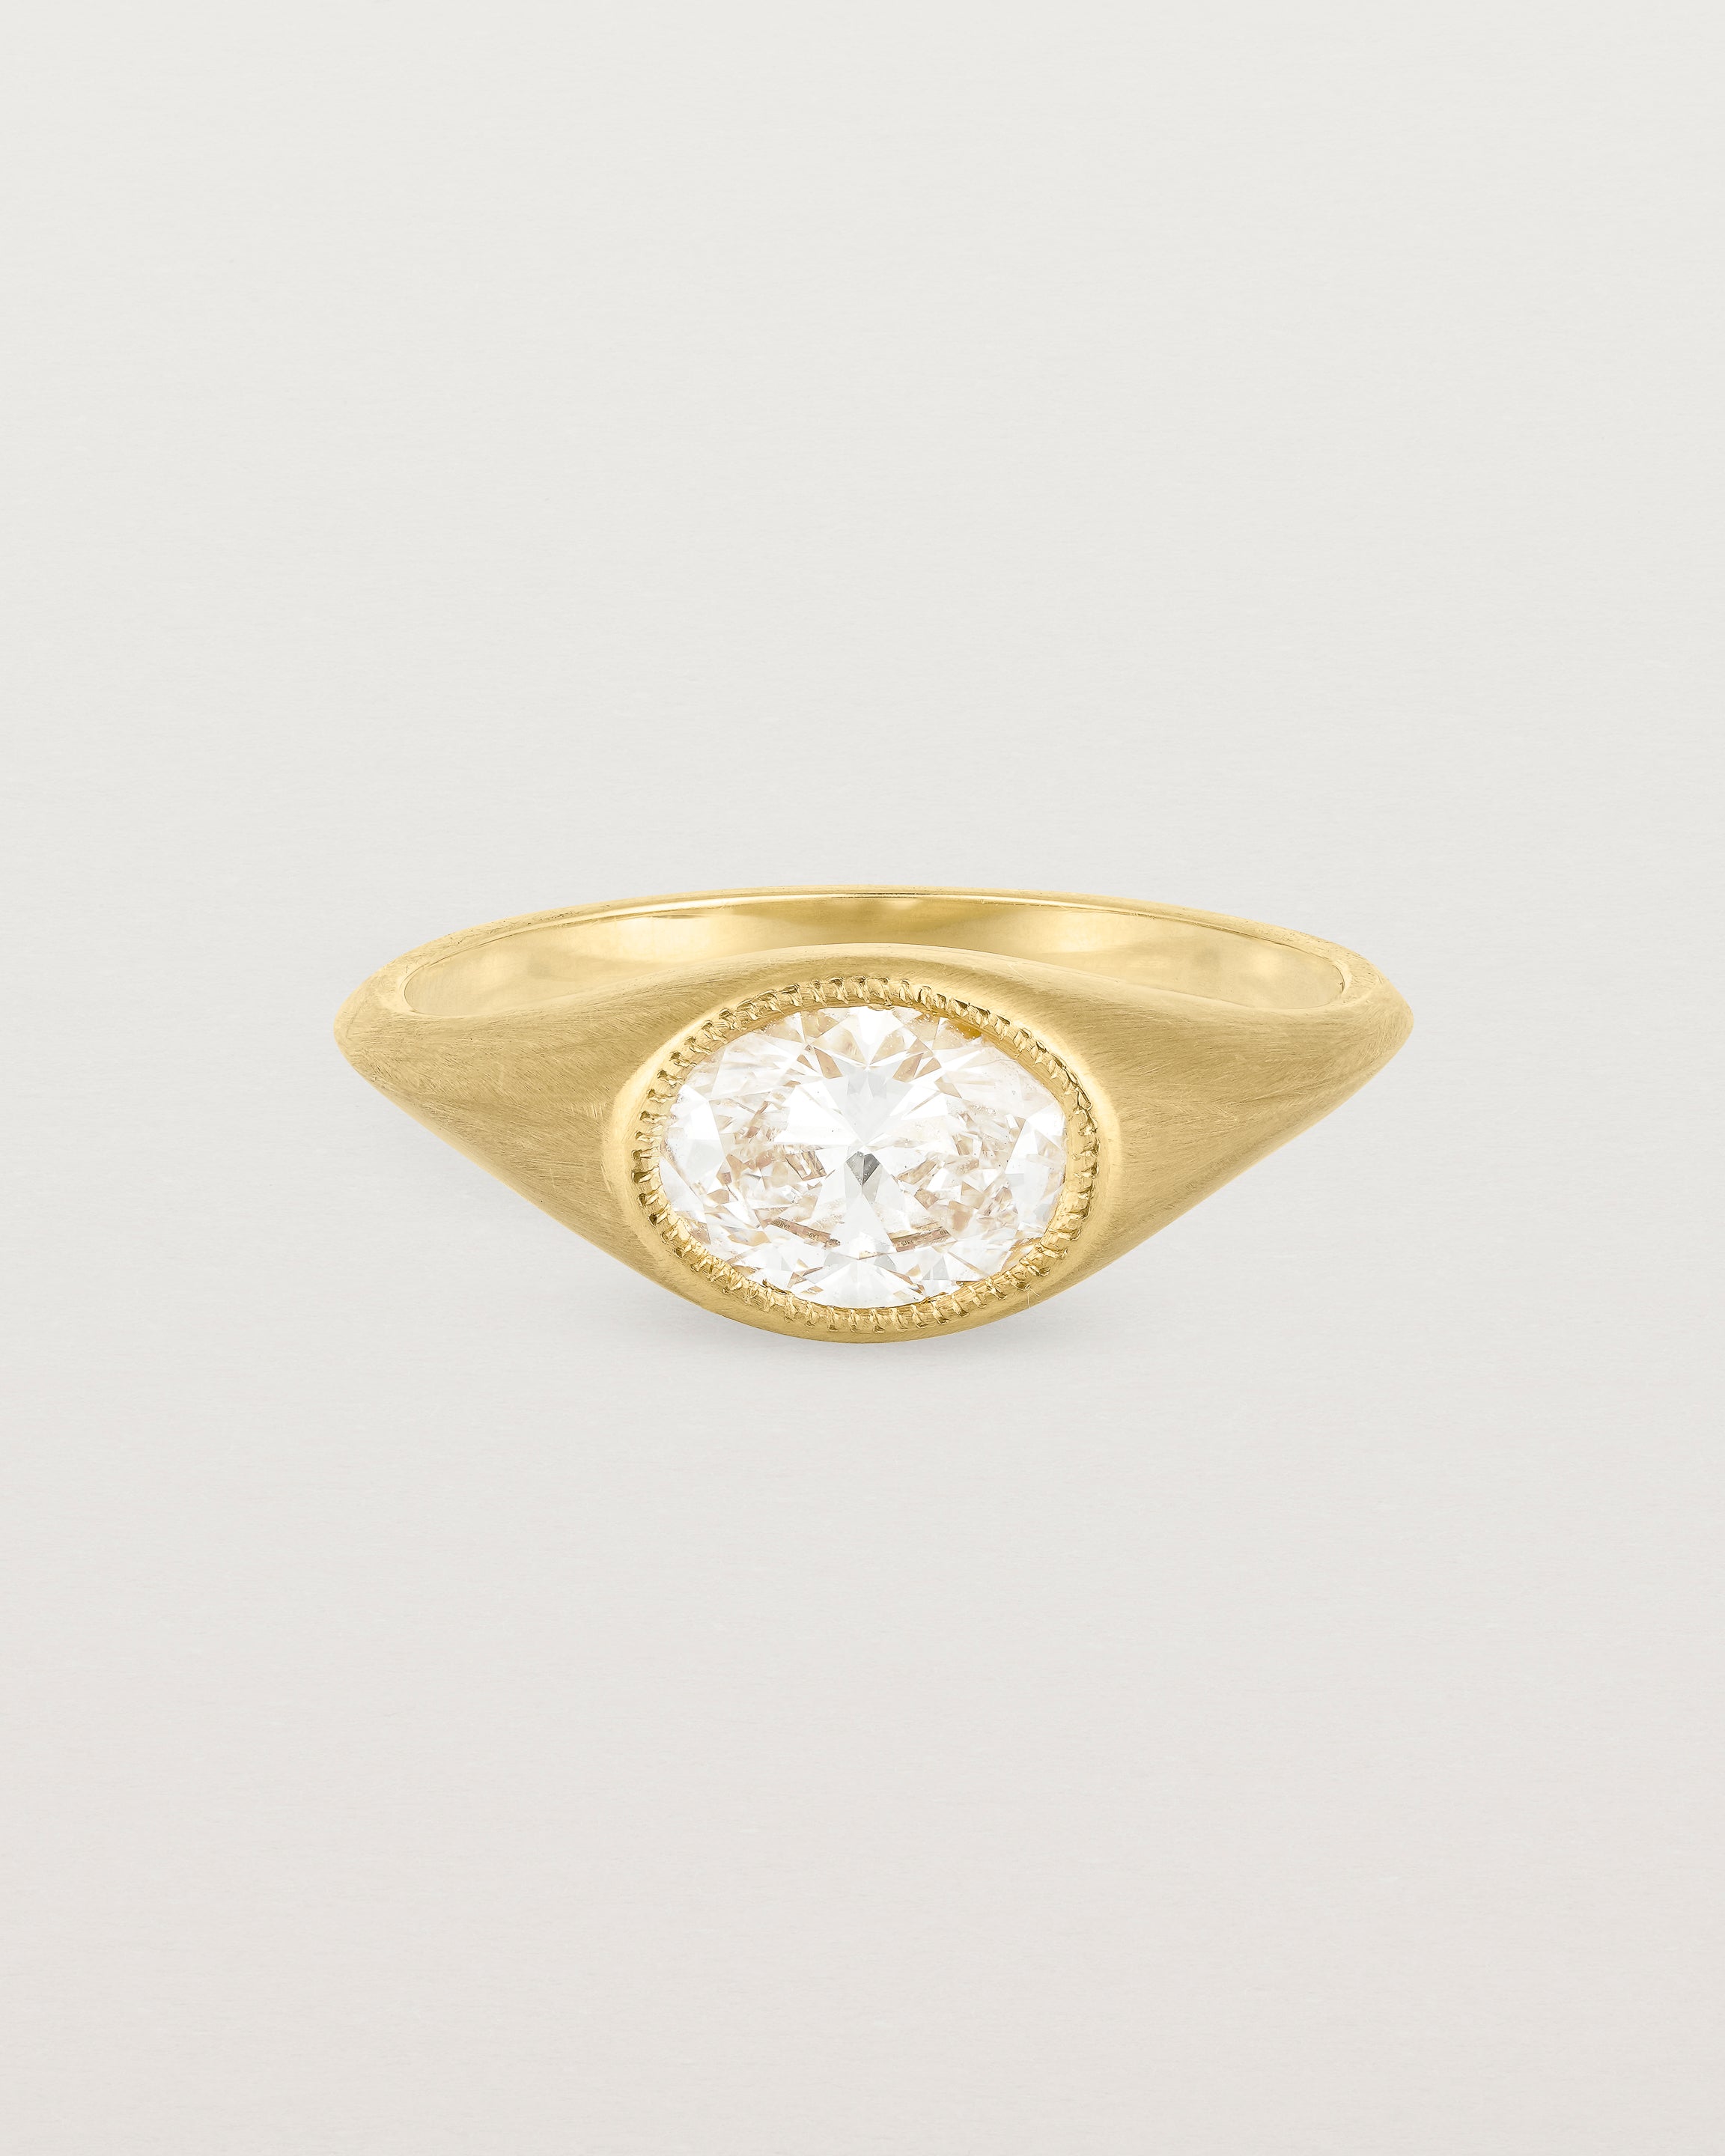 Front view of the Átlas Oval Signet | Laboratory Grown Diamond in yellow gold, with a matte finish. _label: Matte Finish Example